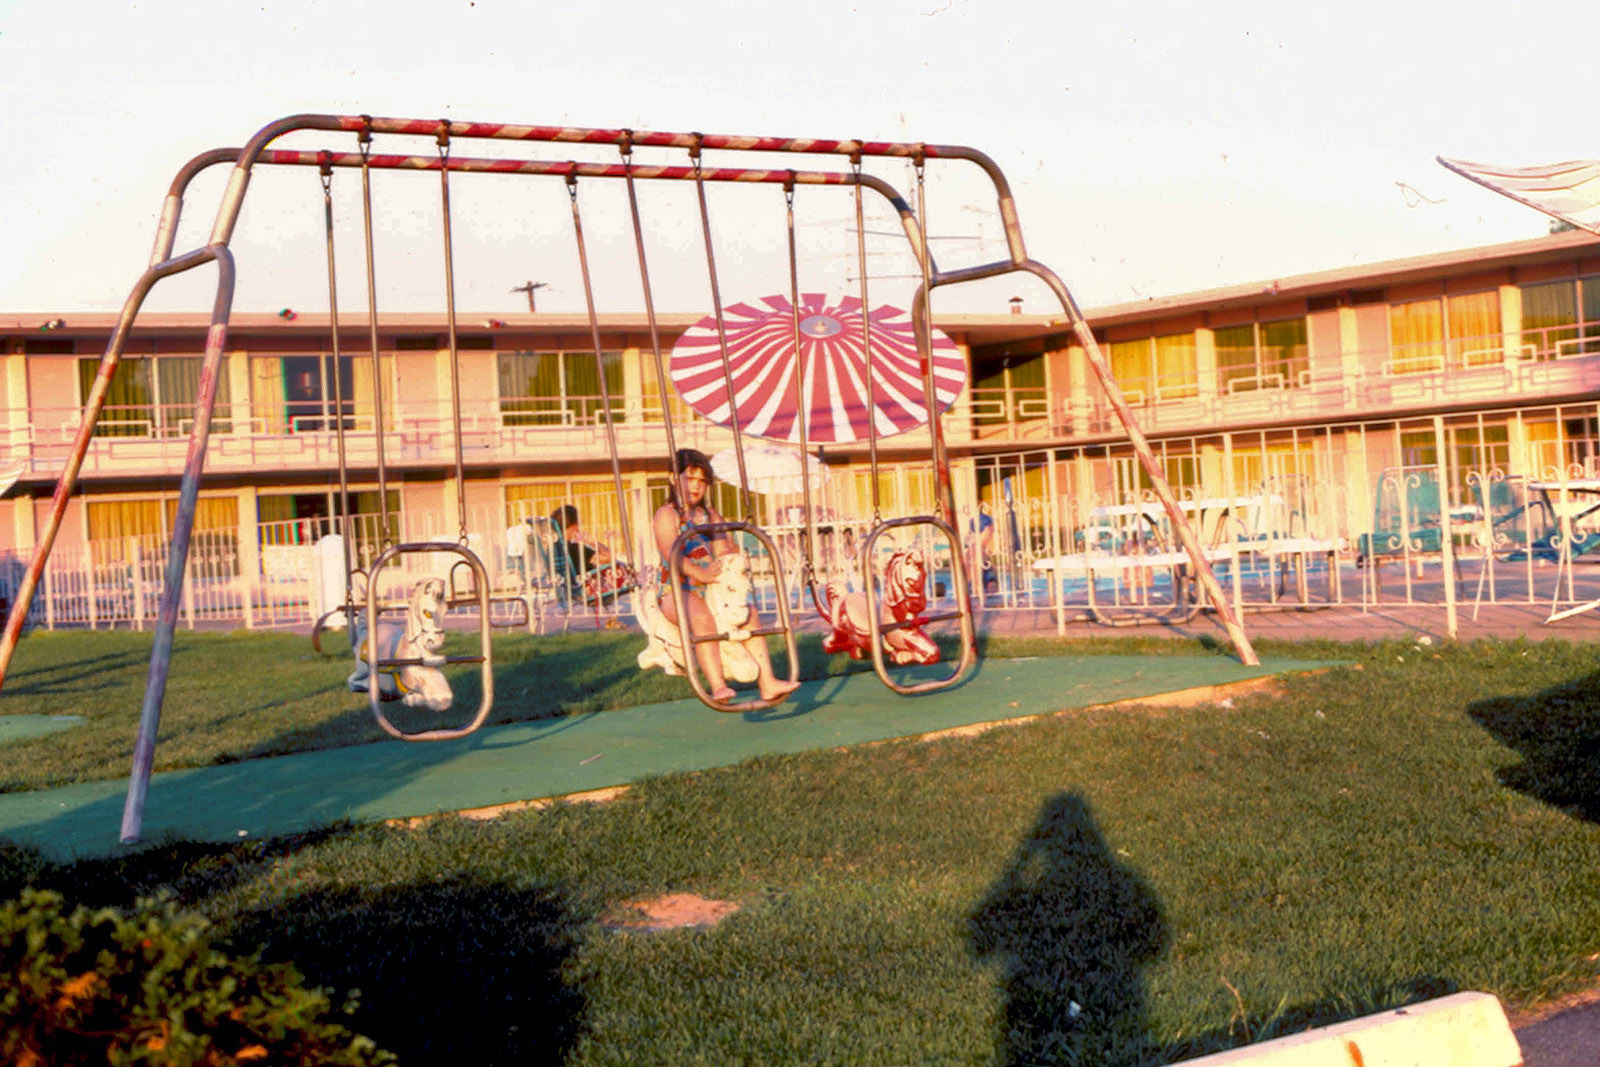 This is me on a swing at a motel in either Maryland or Delaware sometime in the mid-1970s. It was likely taken by my father, whose shadow appears in the photo, too. I really like this photo -- the sun, the motel architecture (is that an oxymoron?), the photographer's shadow, and especially the red and white pool umbrella. Doesn't it all just scream 1970s? View full size.